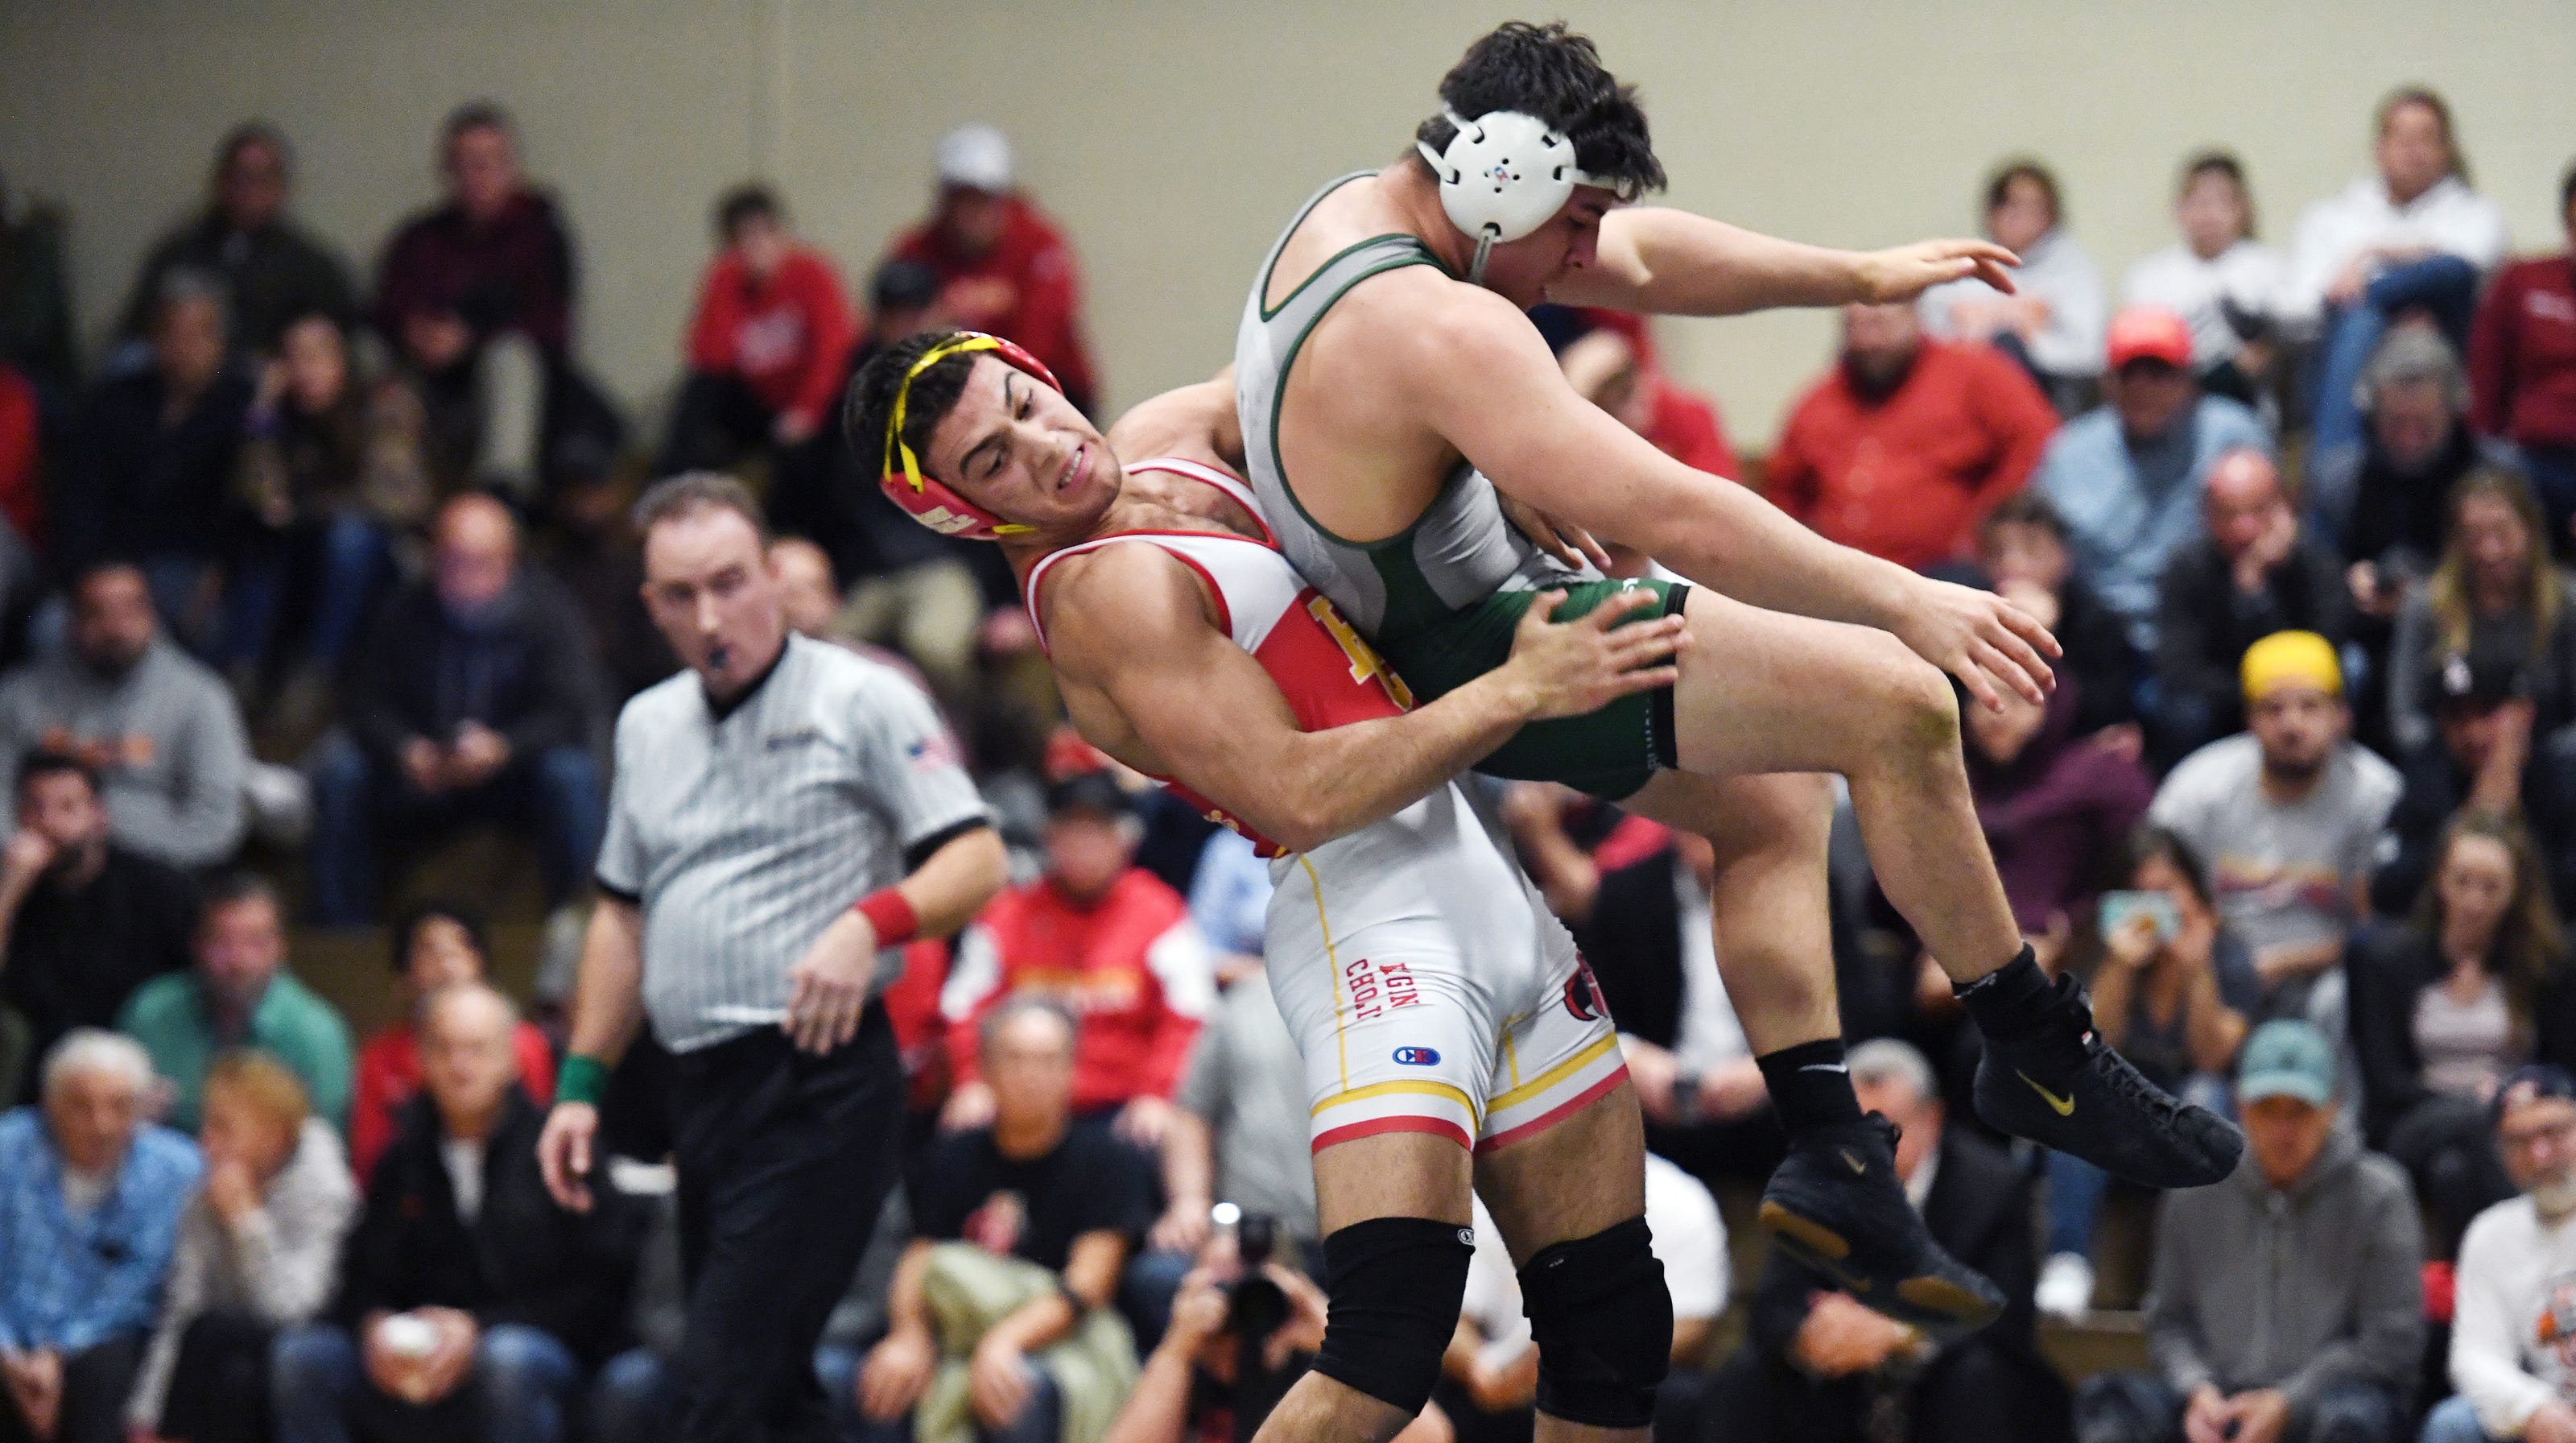 Bergen Catholic wrestling storms to eighthstraight sectional title